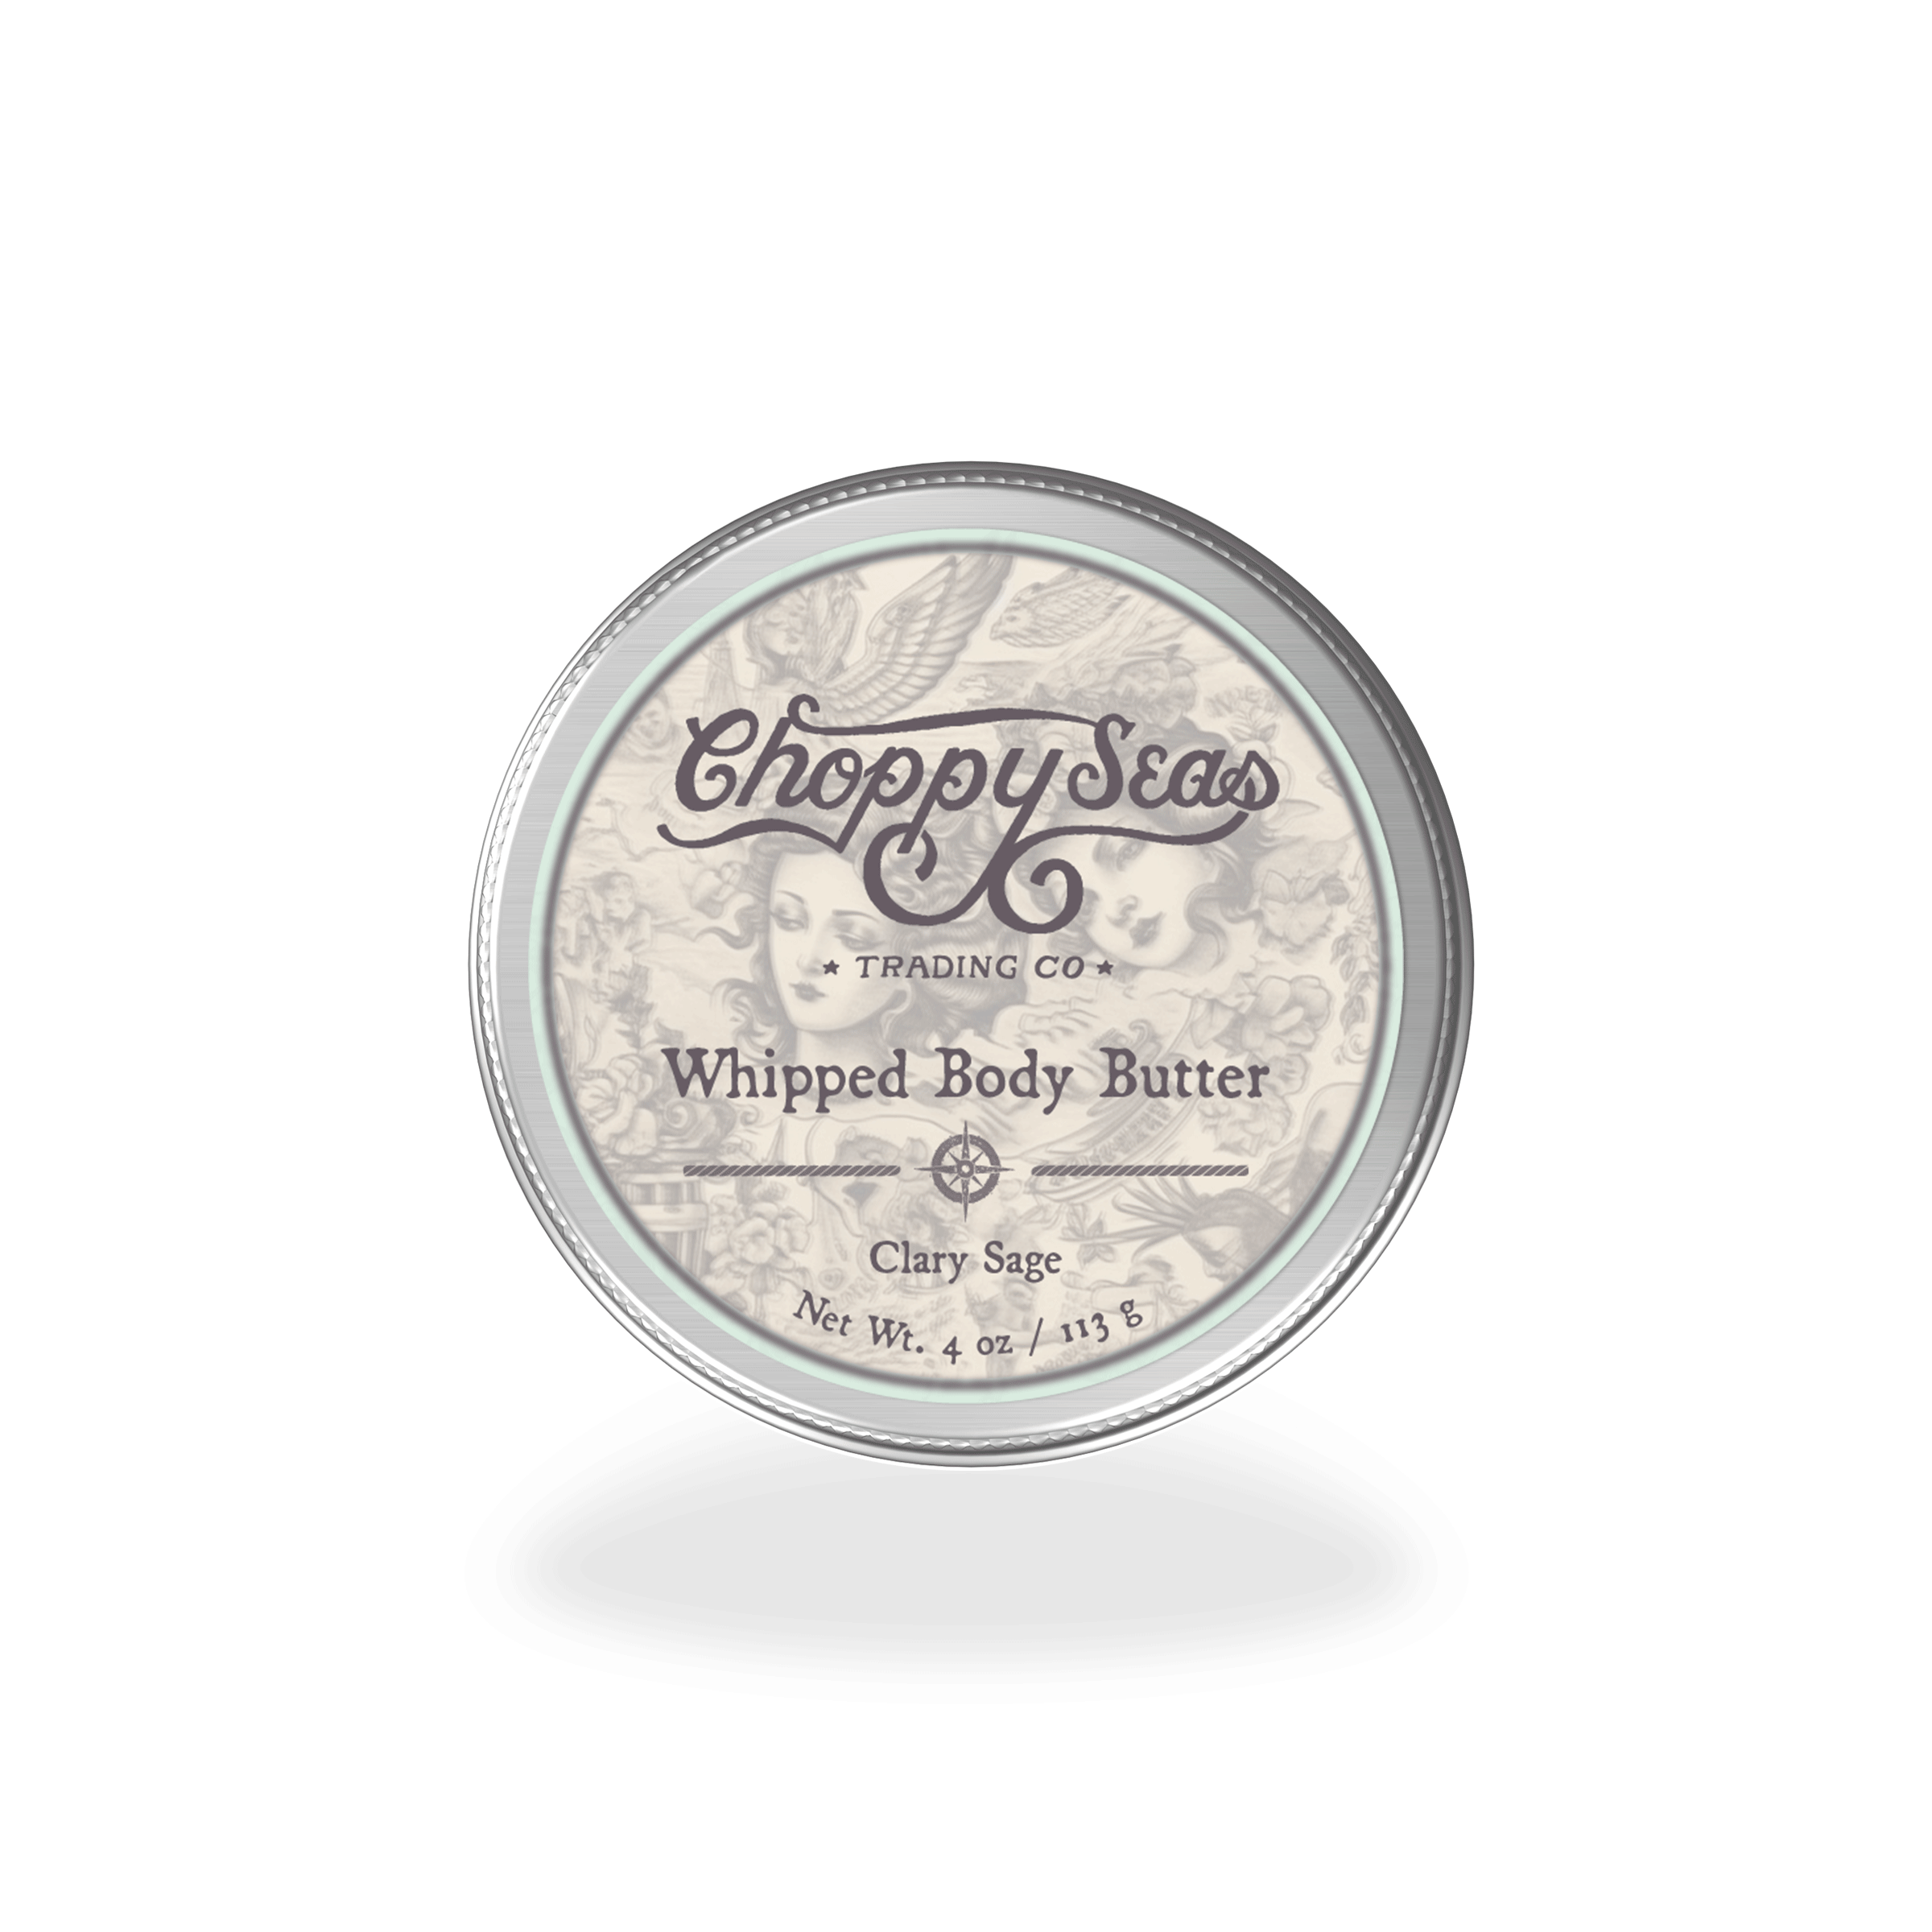 Clary Sage Whipped Body Butter